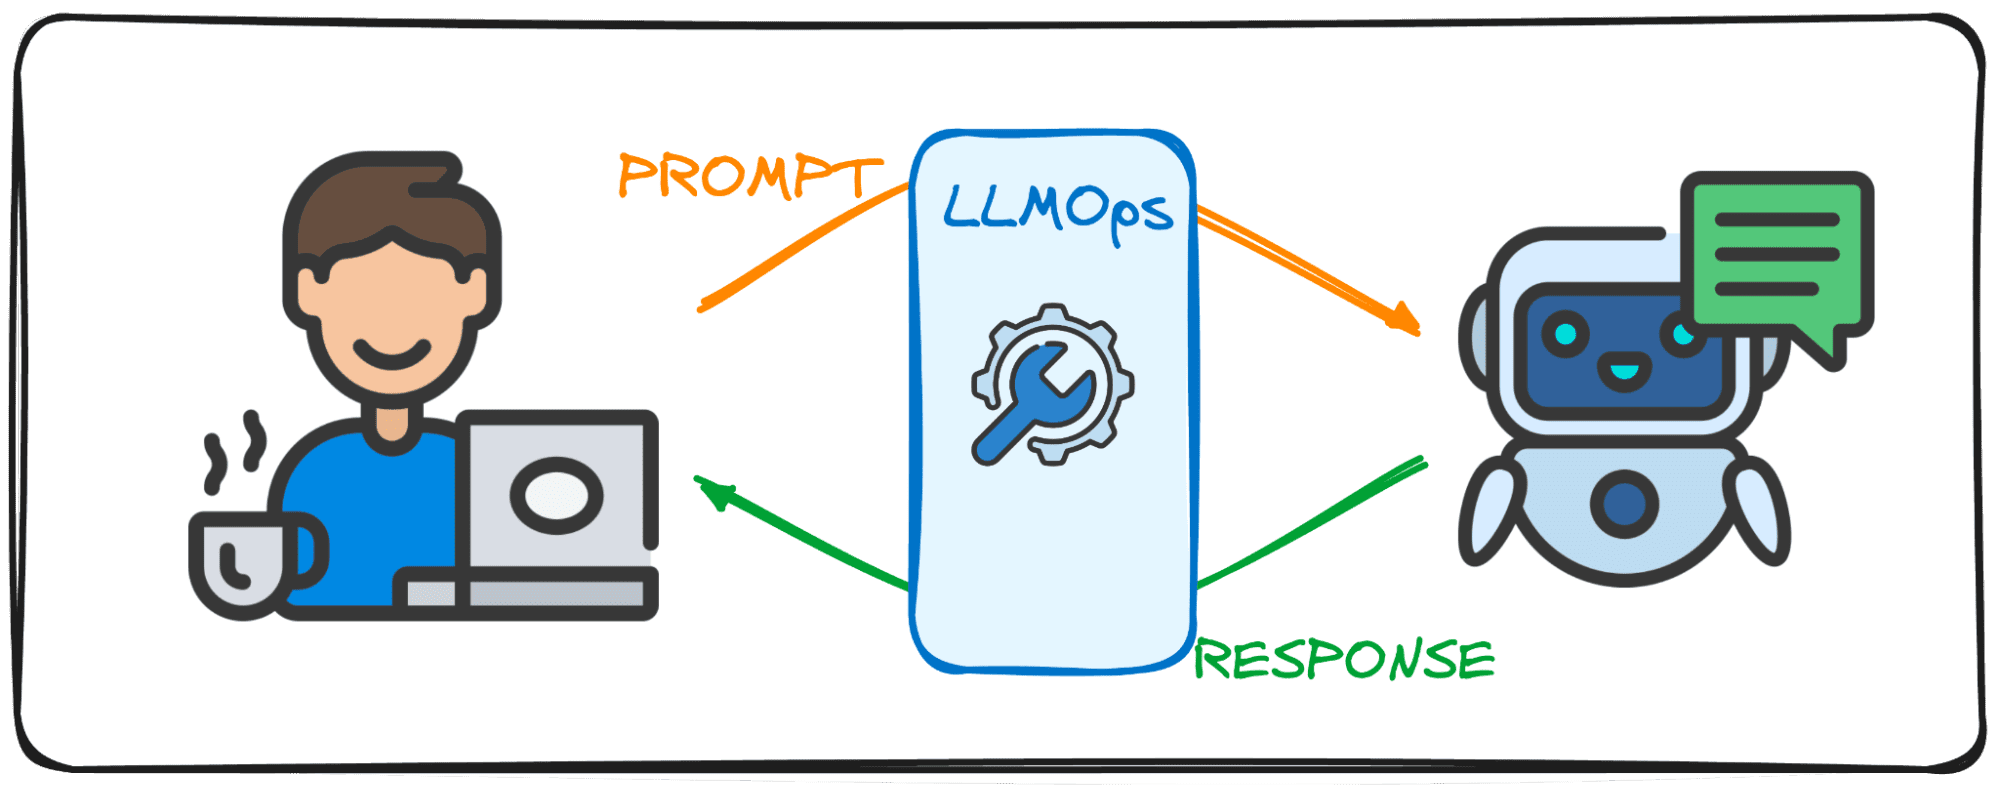 Getting Started with LLMOps: The Secret Sauce Behind Seamless Interactions - KDnuggets